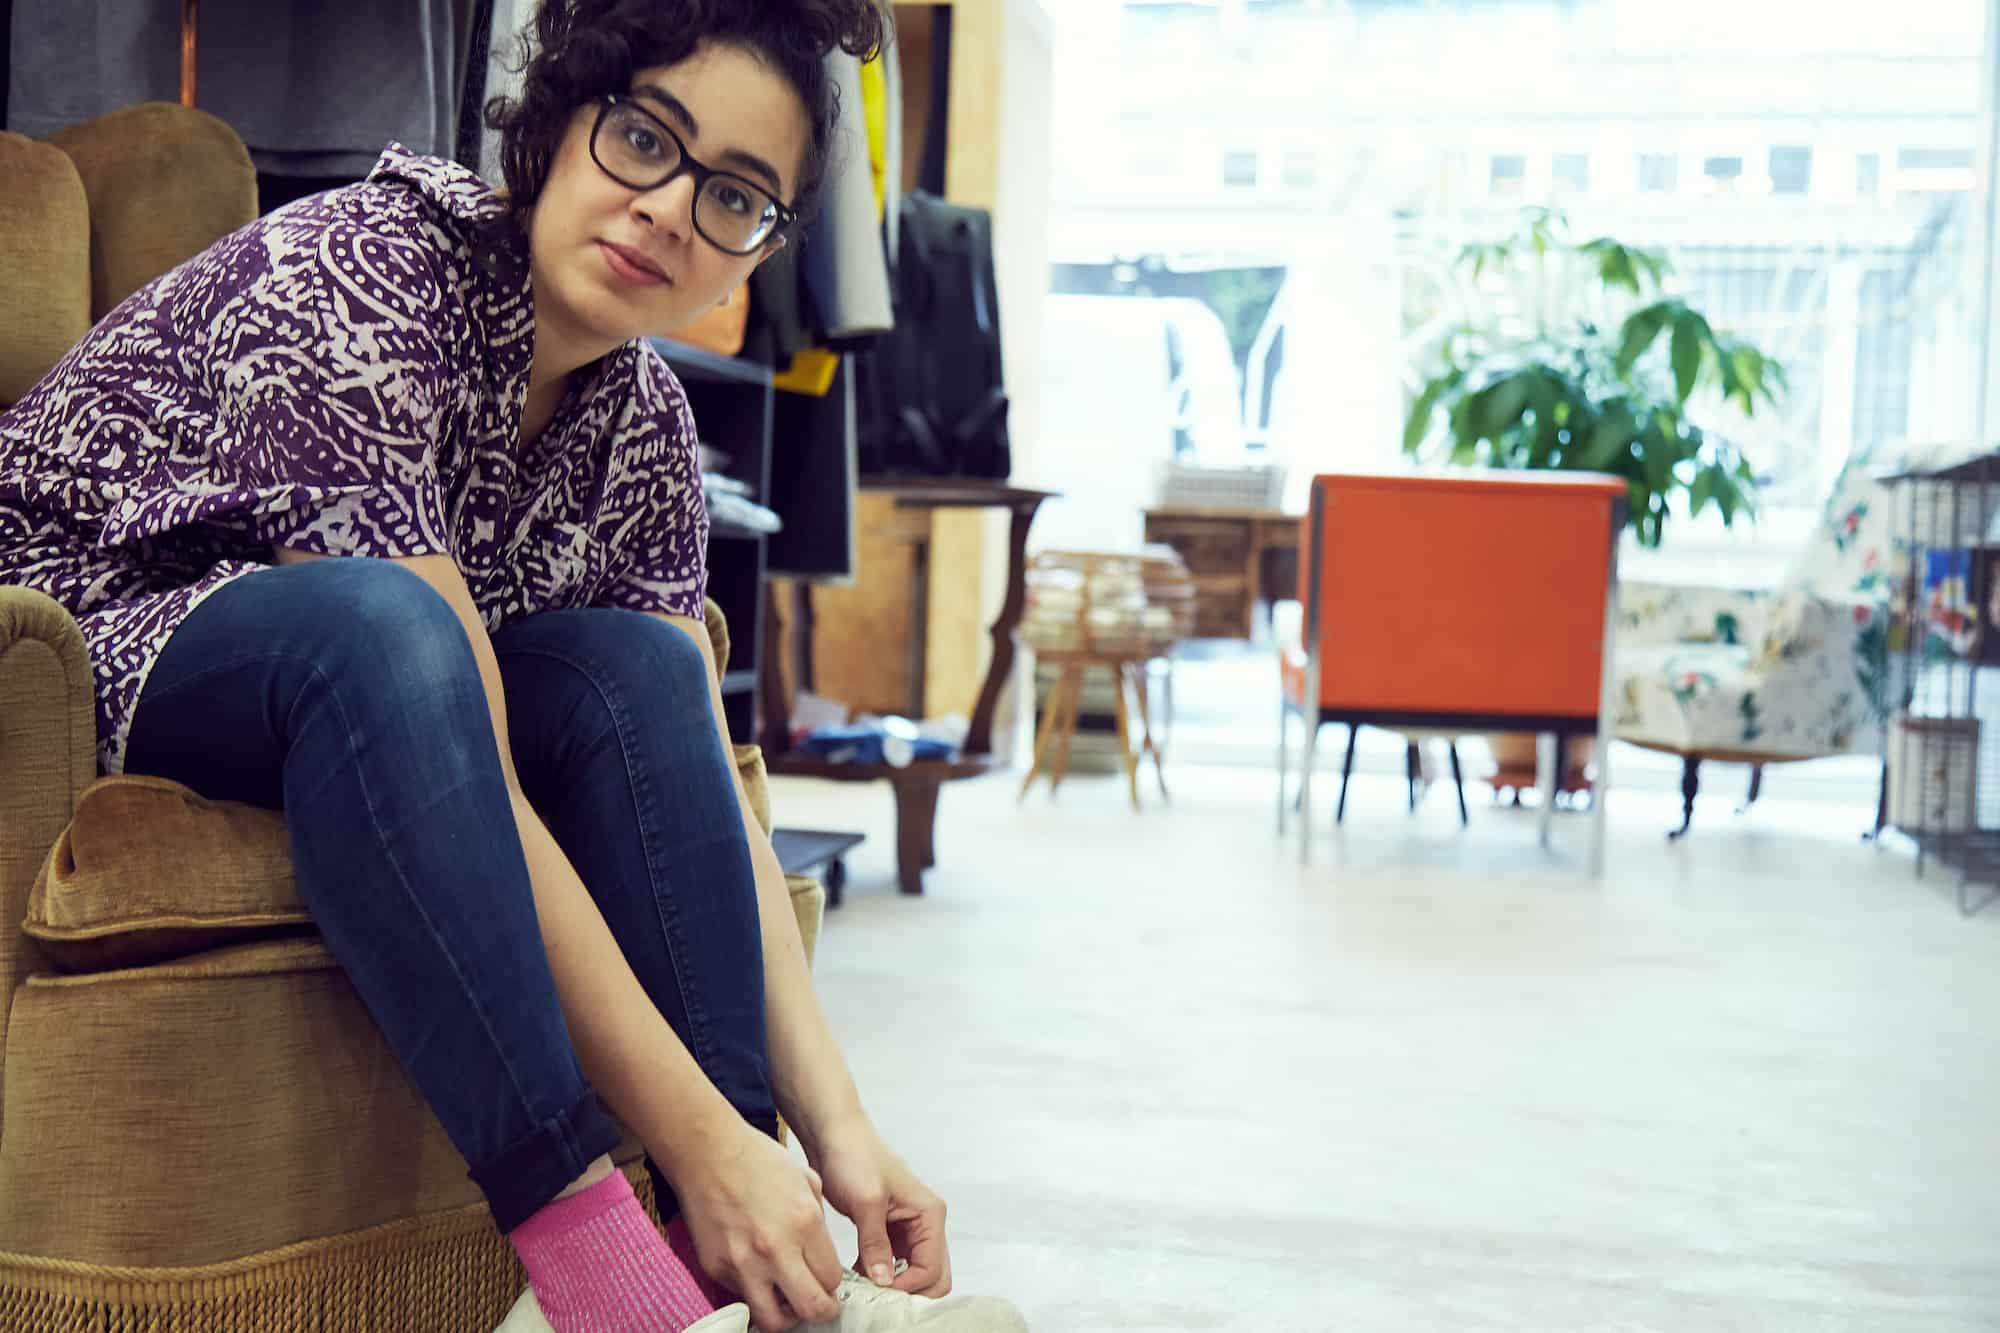 At Paris' green concept store Aujourd'hui Demain, you'll find vintage furniture and some great fashion apparel too like shoes being tried on by this girl sitting in a velvet armchair.